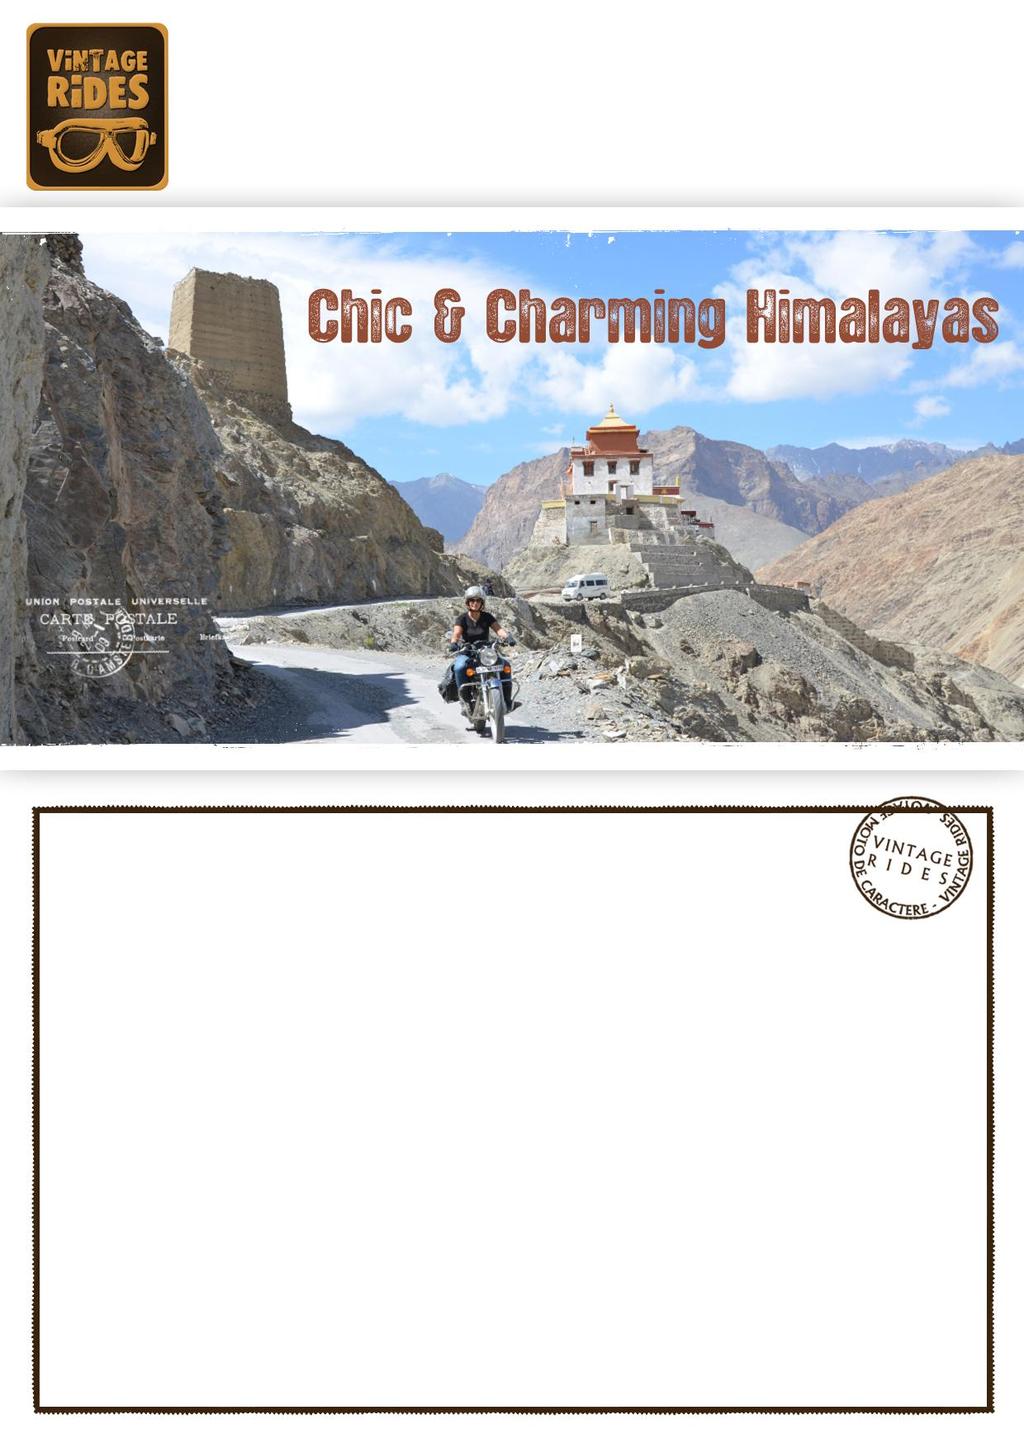 Chic & Charming Himalayas, India 9 days including 5 riding days Best season: Mid-June to Mid-September Full board HIGHLIGHTS o A motorcycle tour off the